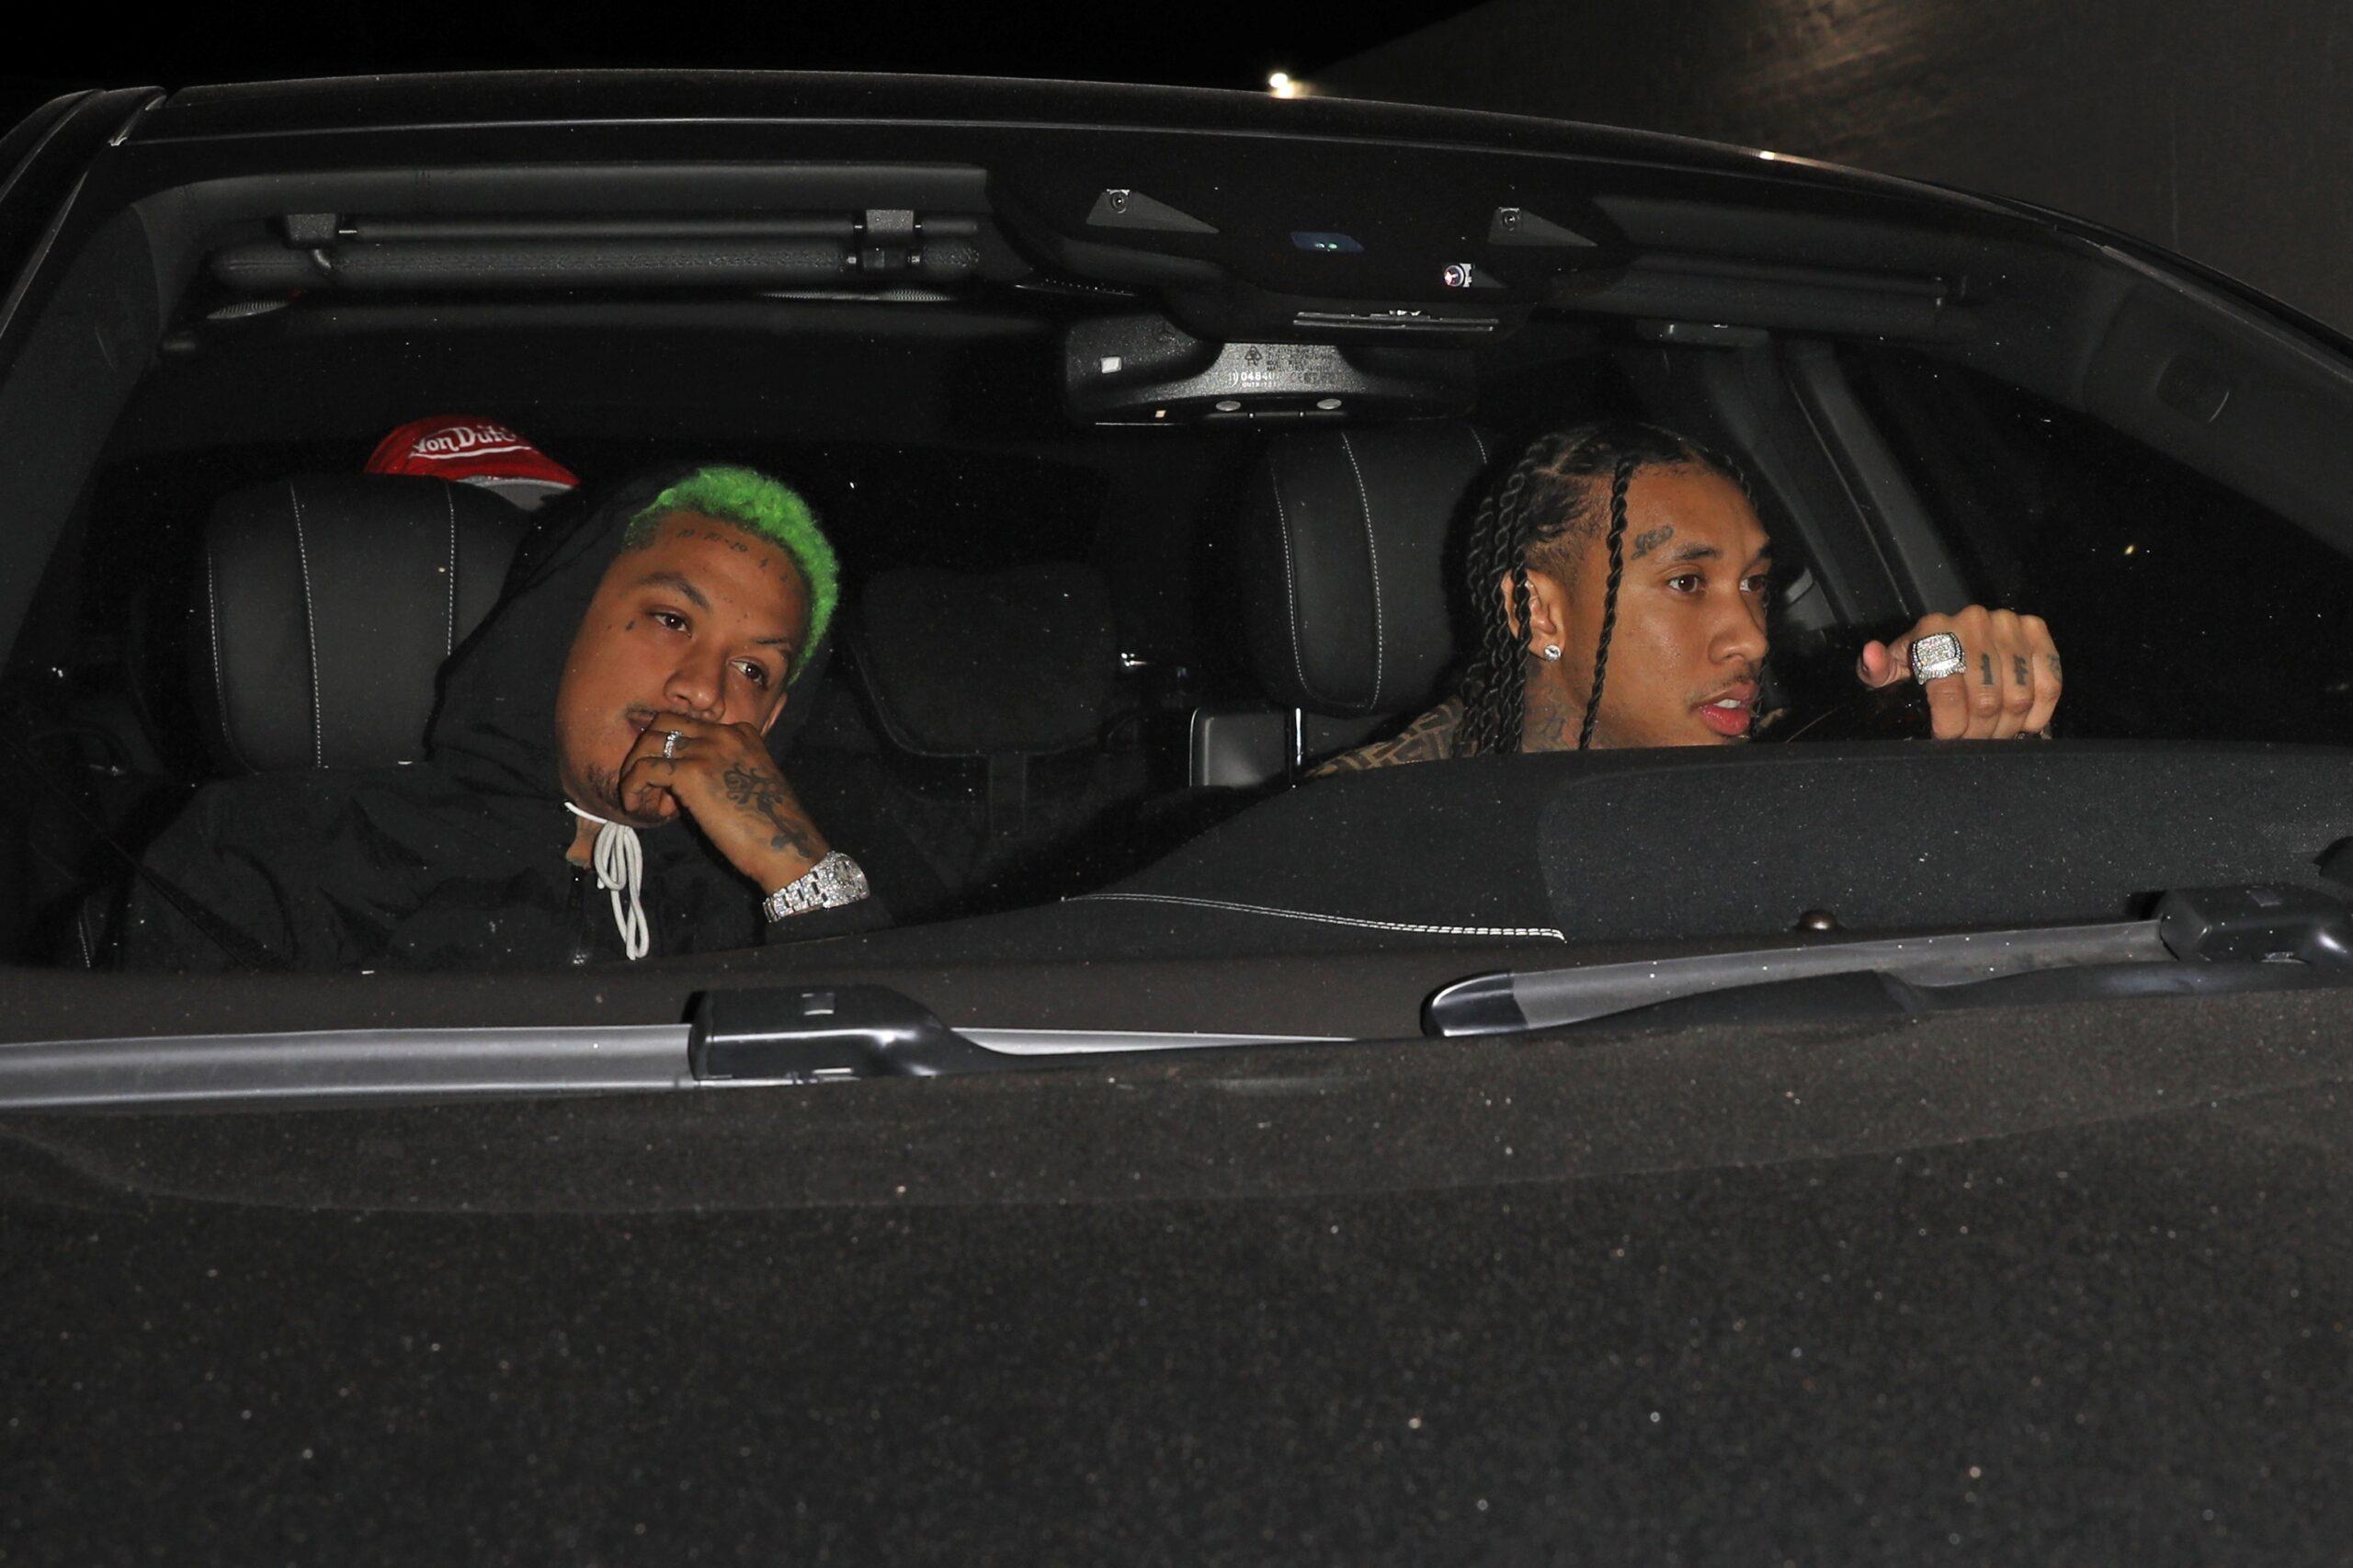 Rapper Tyga and his friend Alexander Edwards are seen leaving the Delilah restaurant